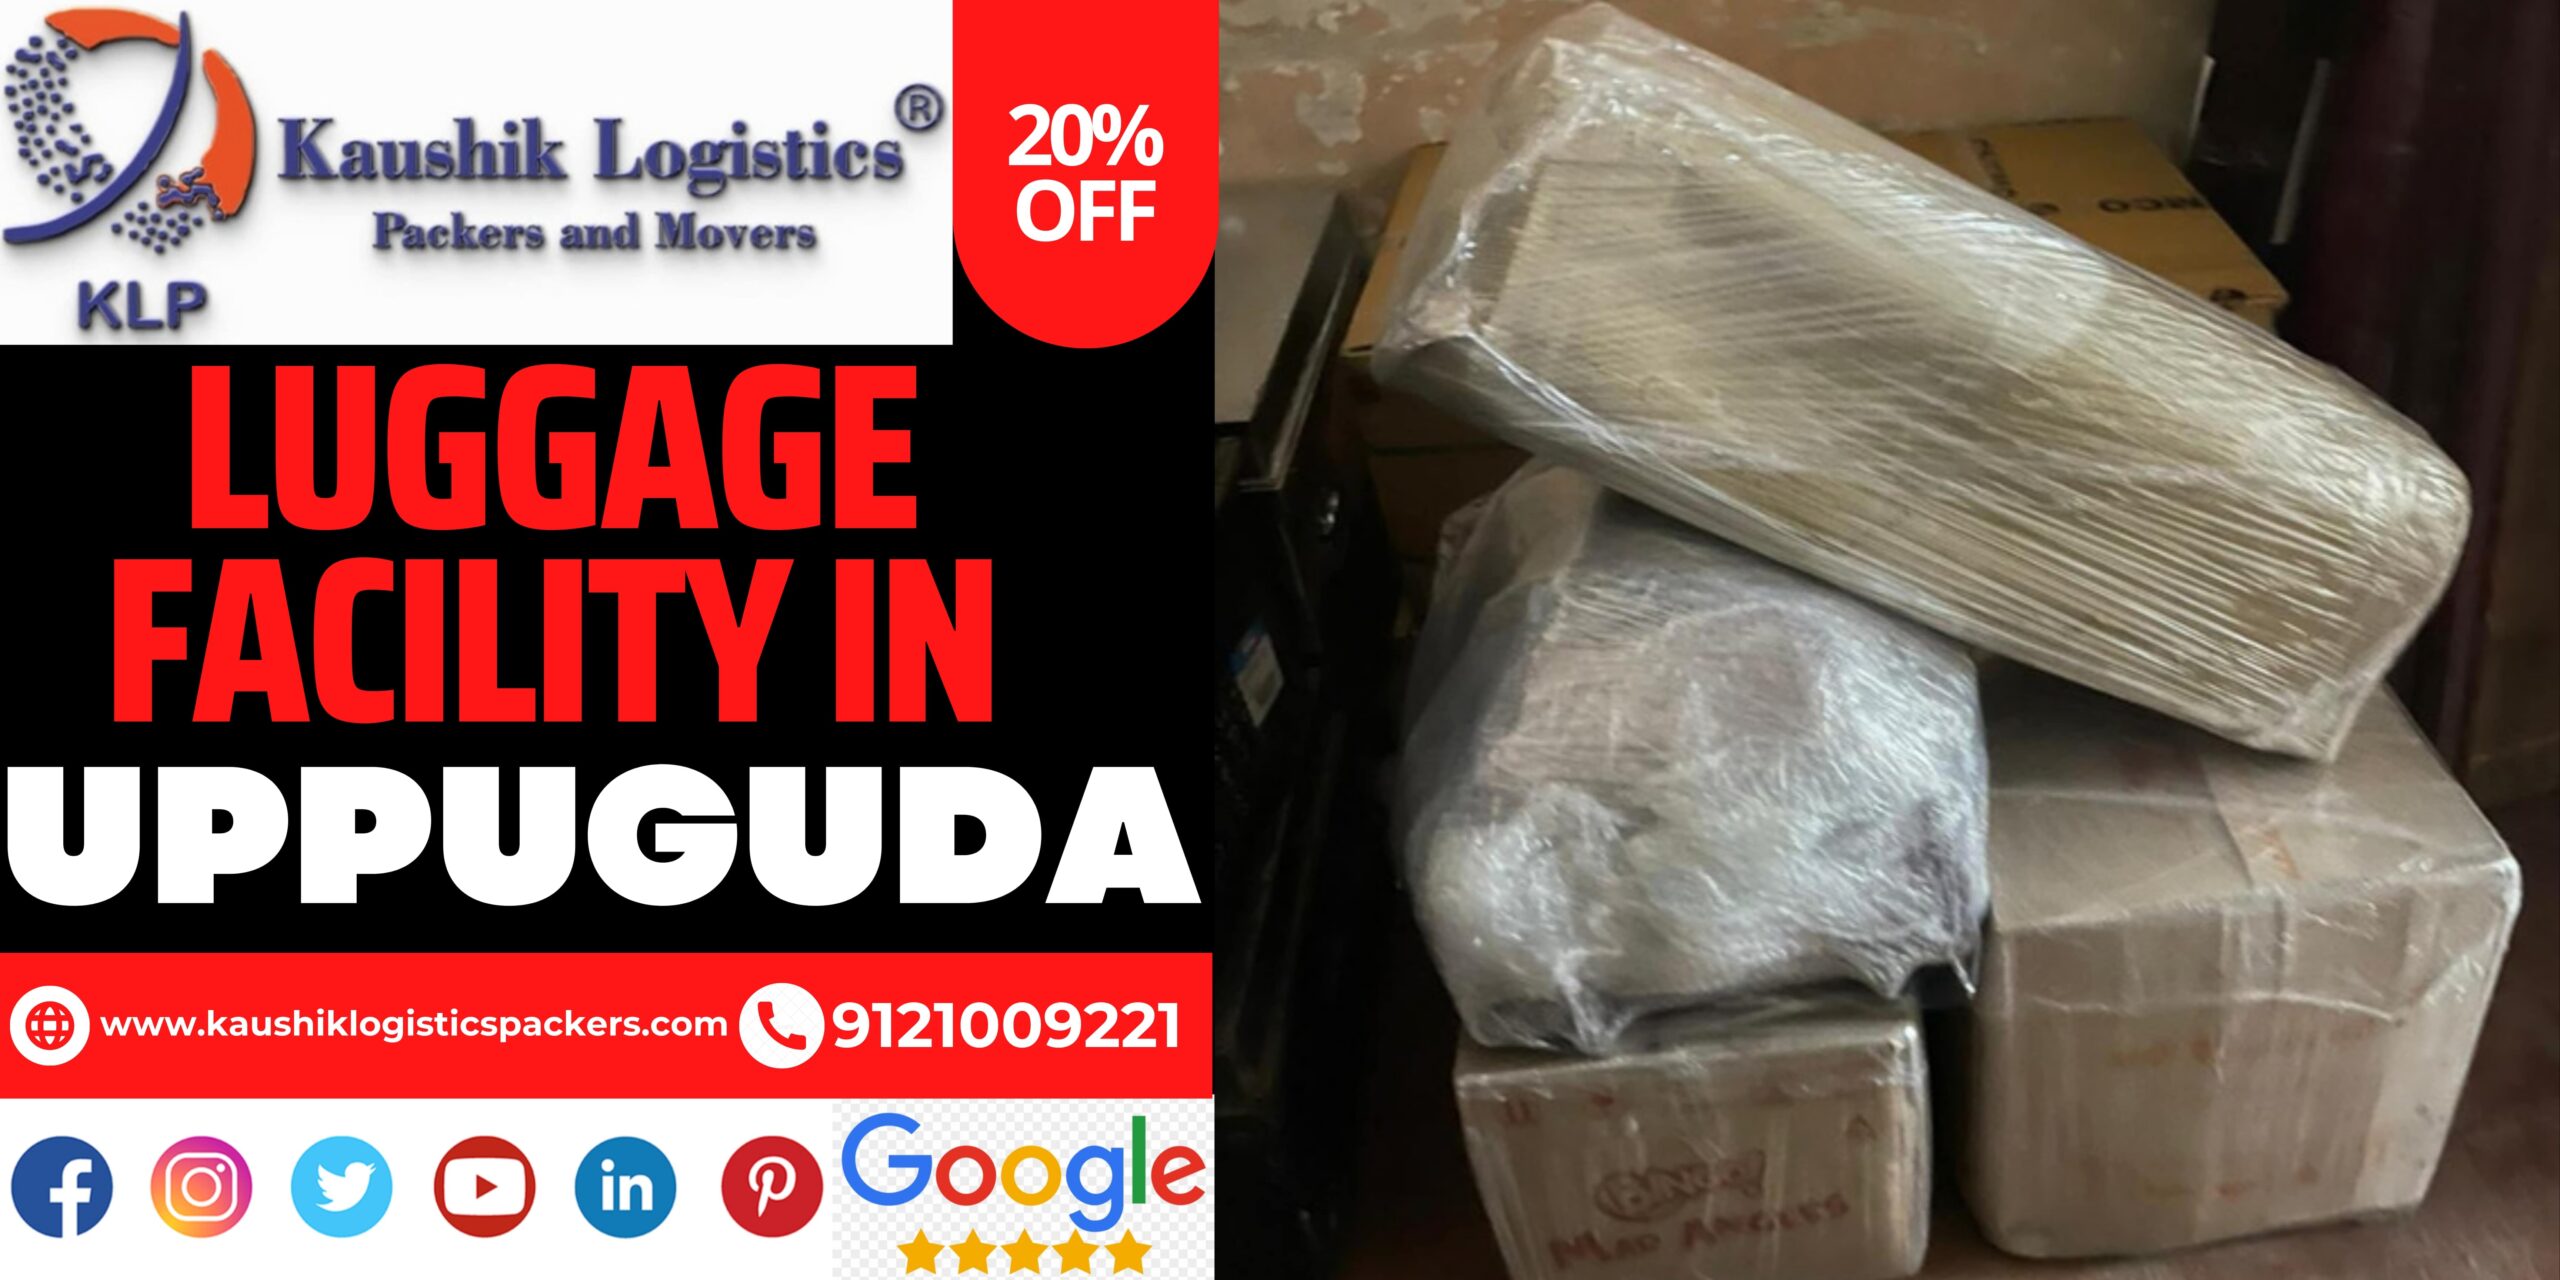 Packers and Movers In Uppuguda